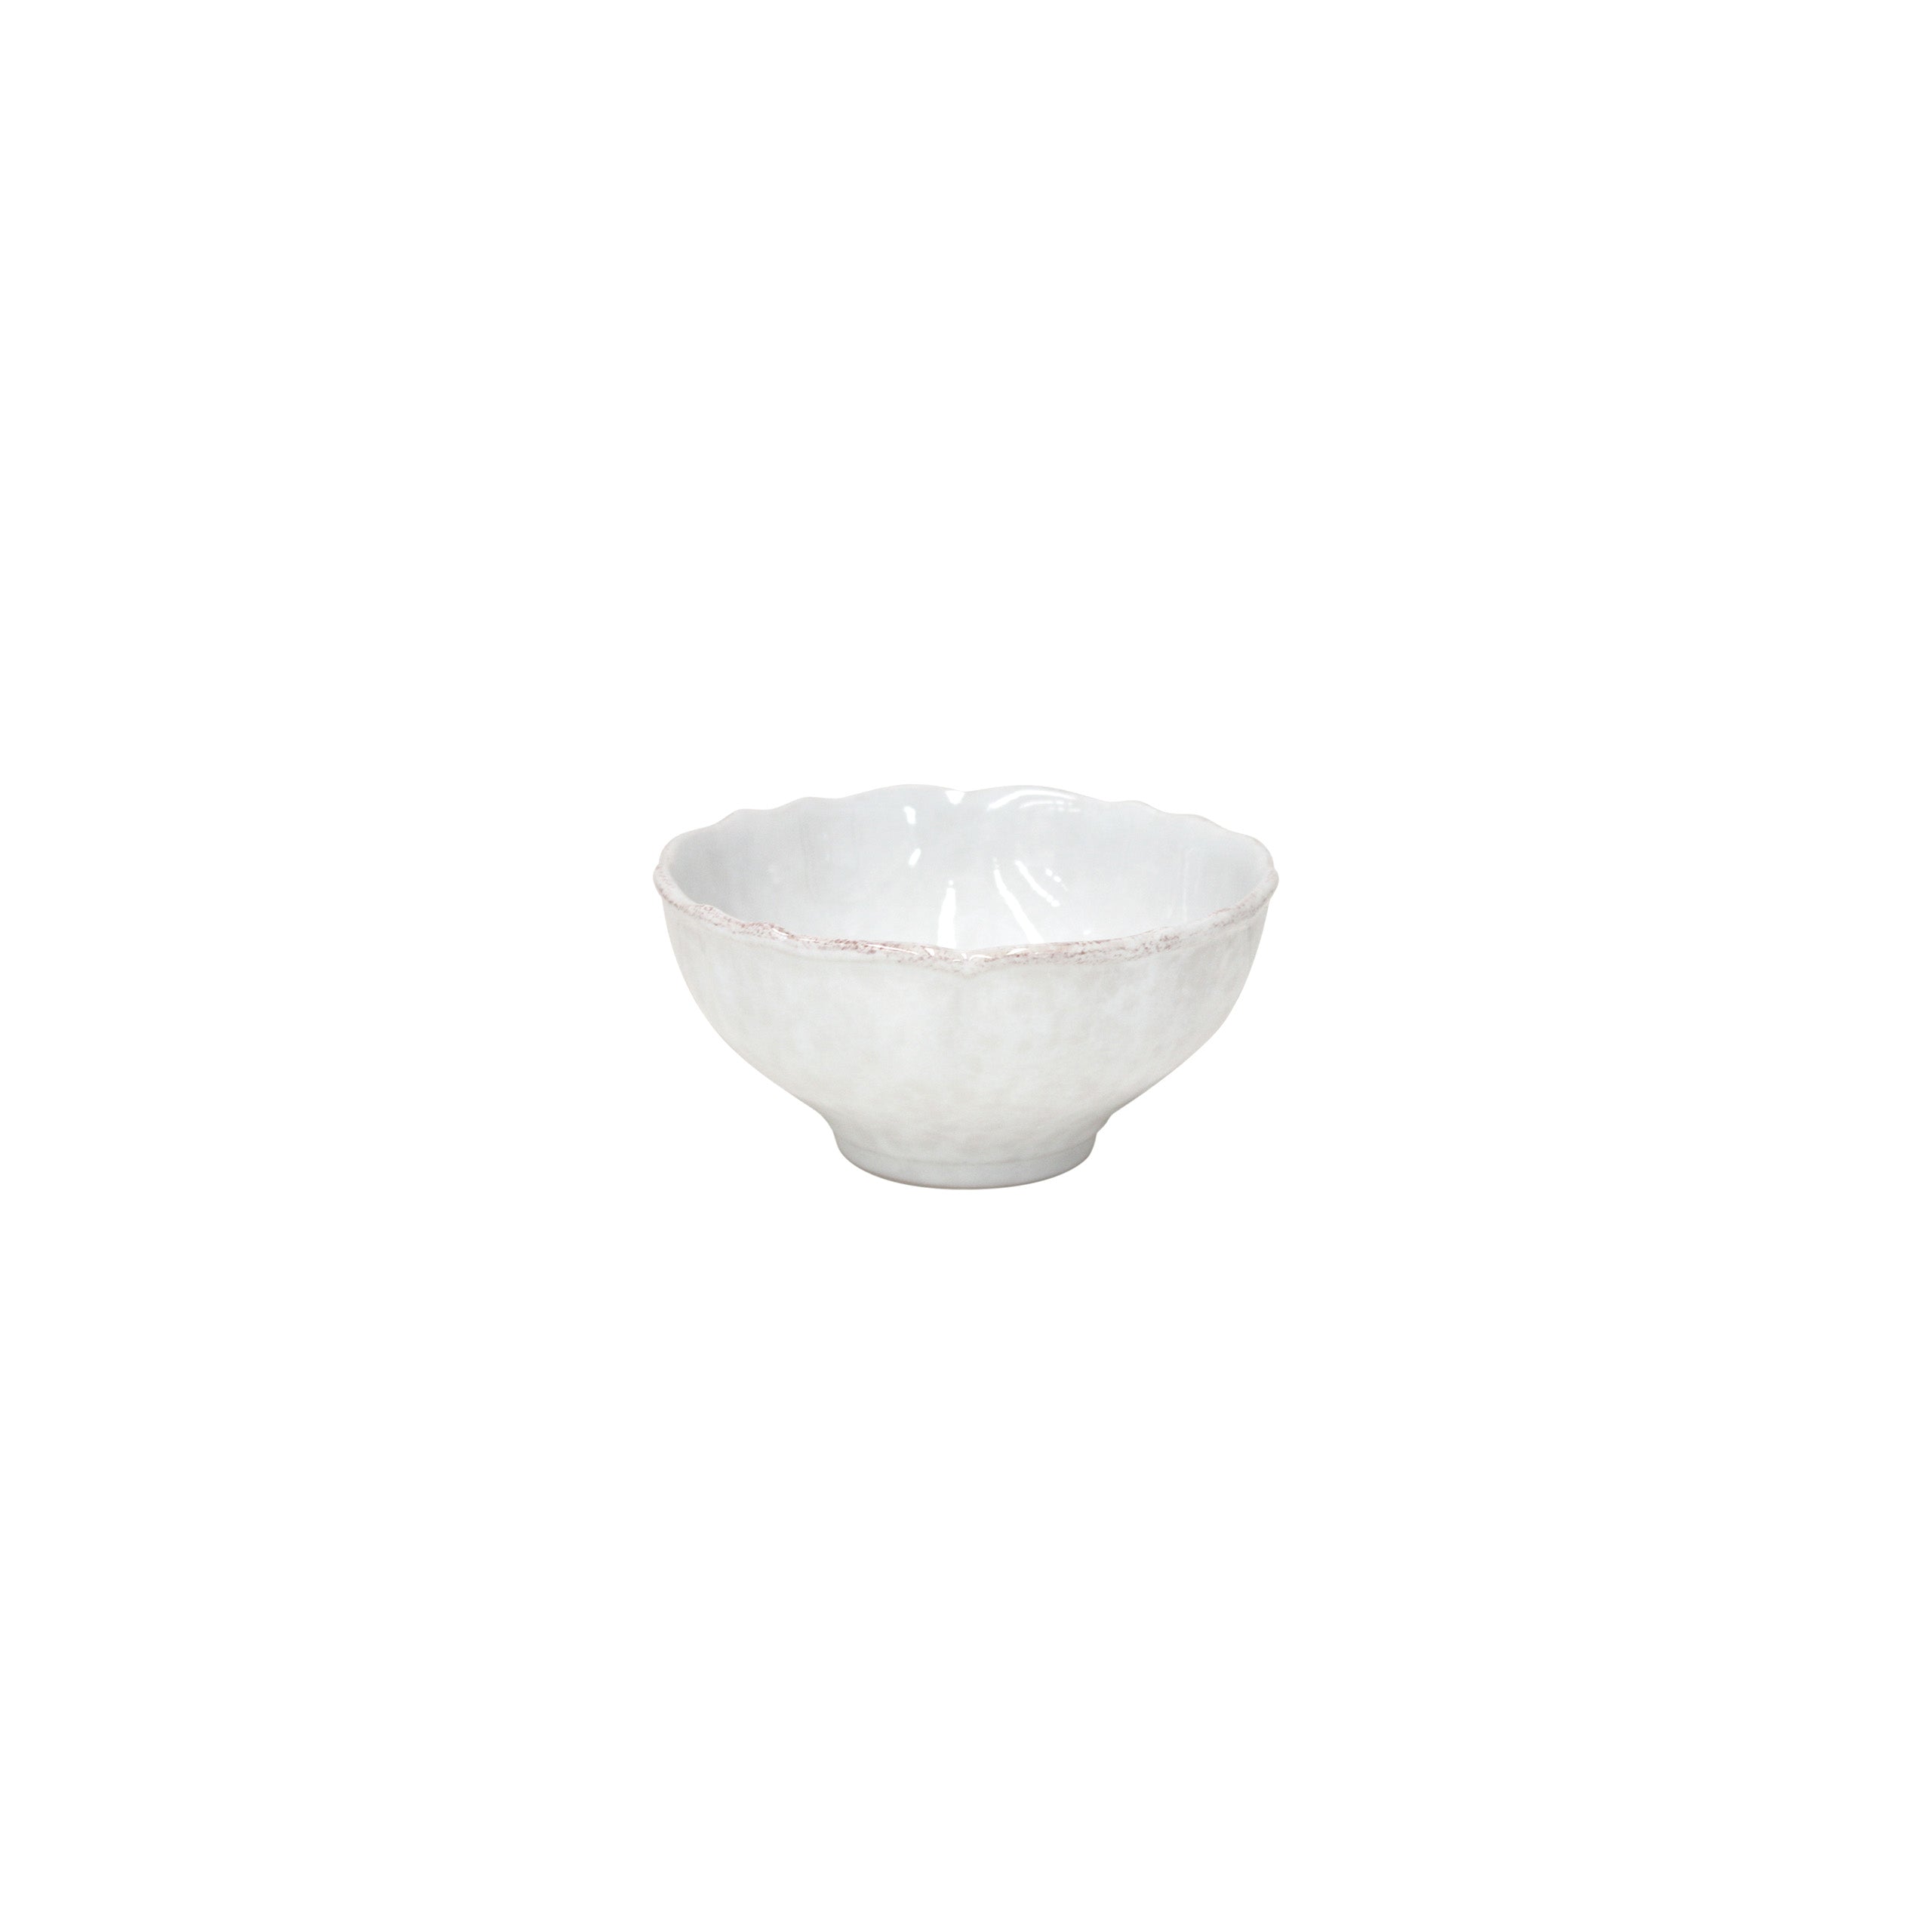 Impressions Soup/Cereal Bowl 6" White